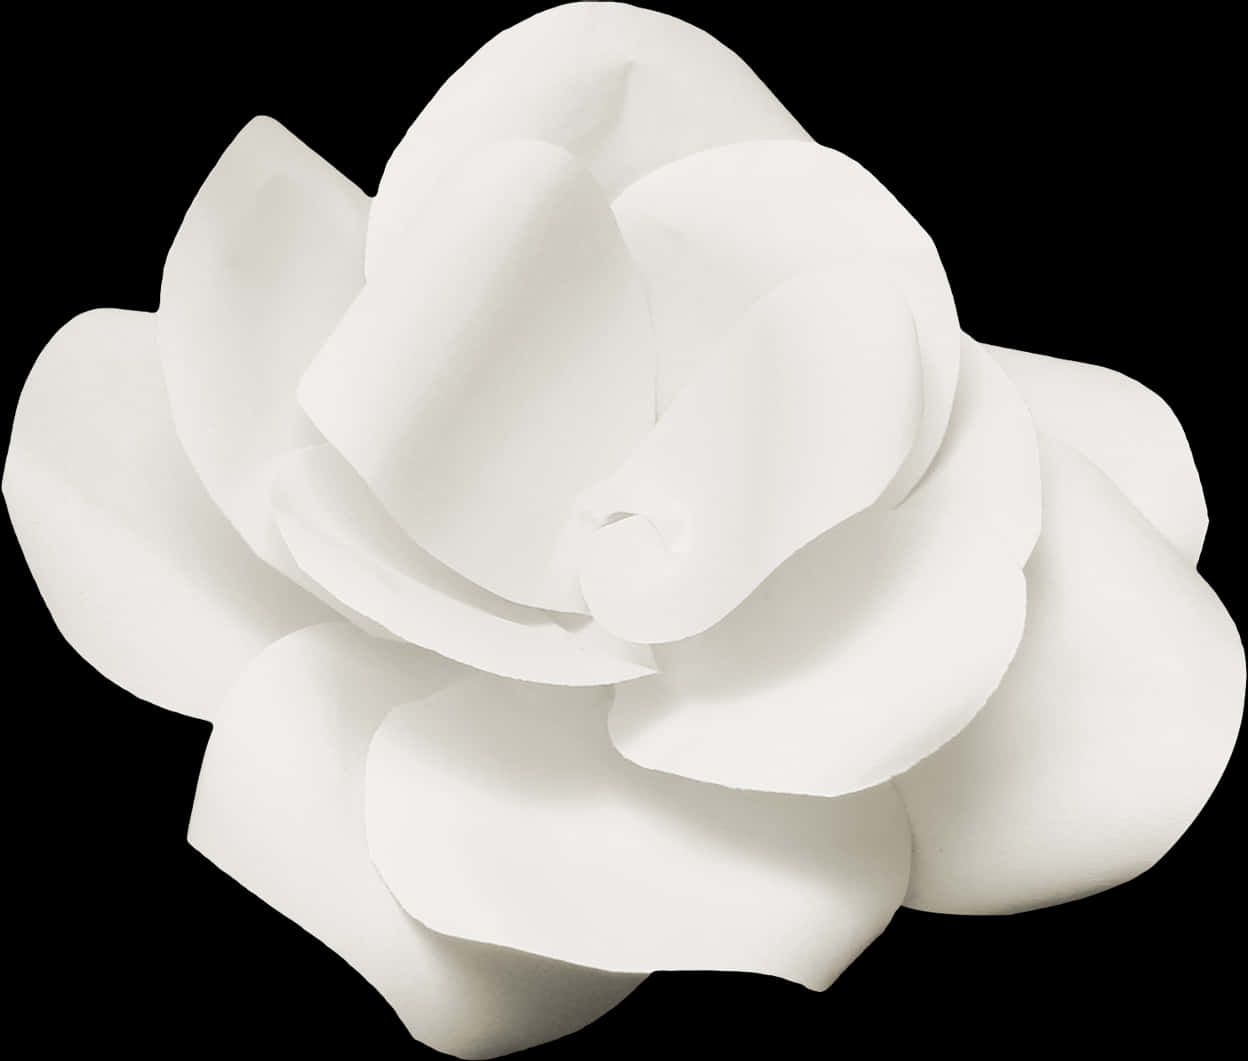 A White Flower On A Black Background